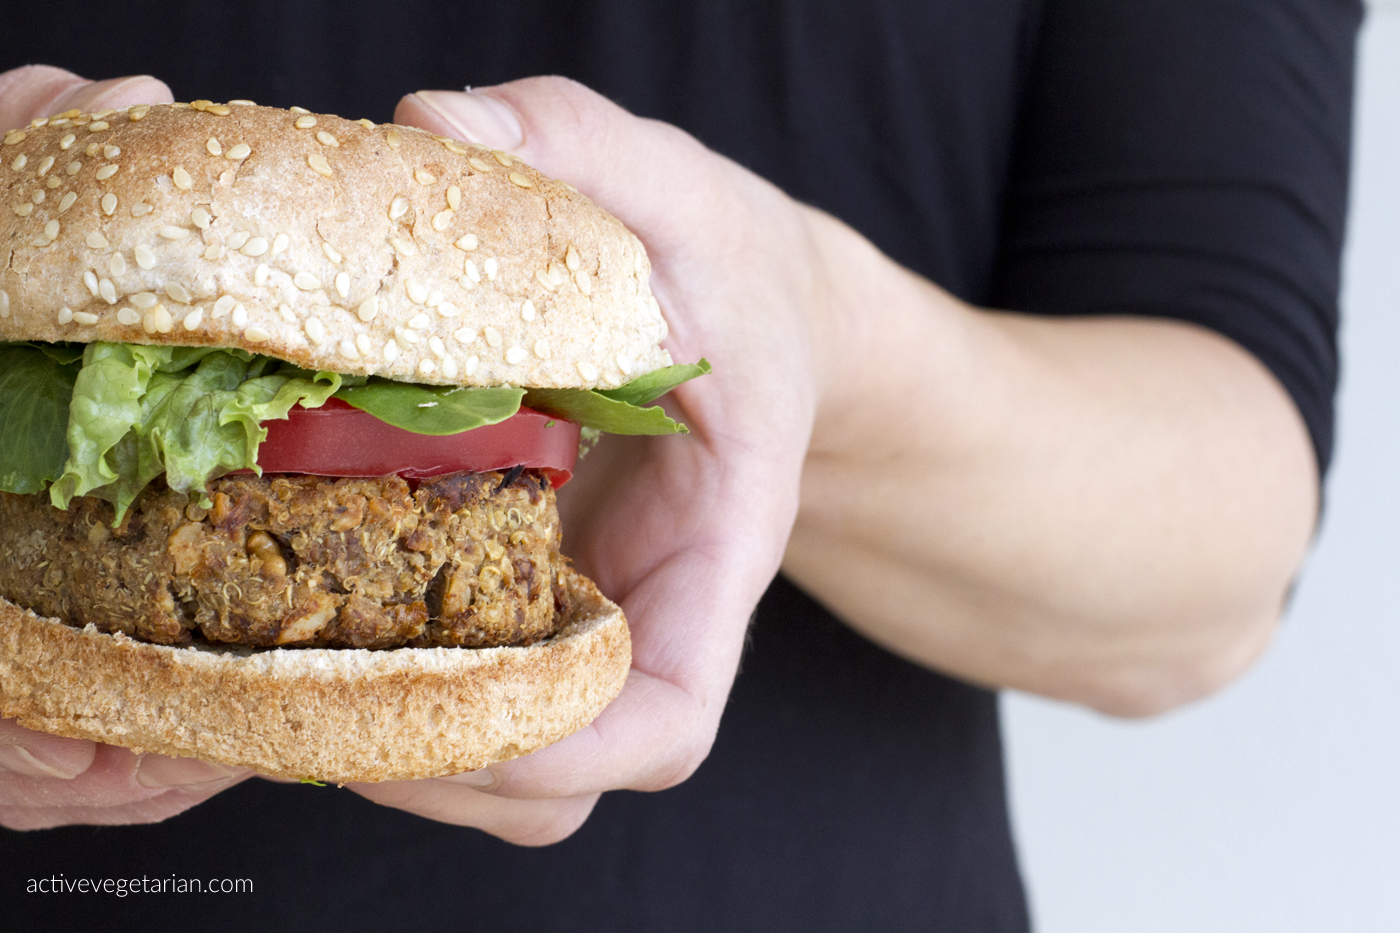 A healthy homemade vegan burger that is high in protein.